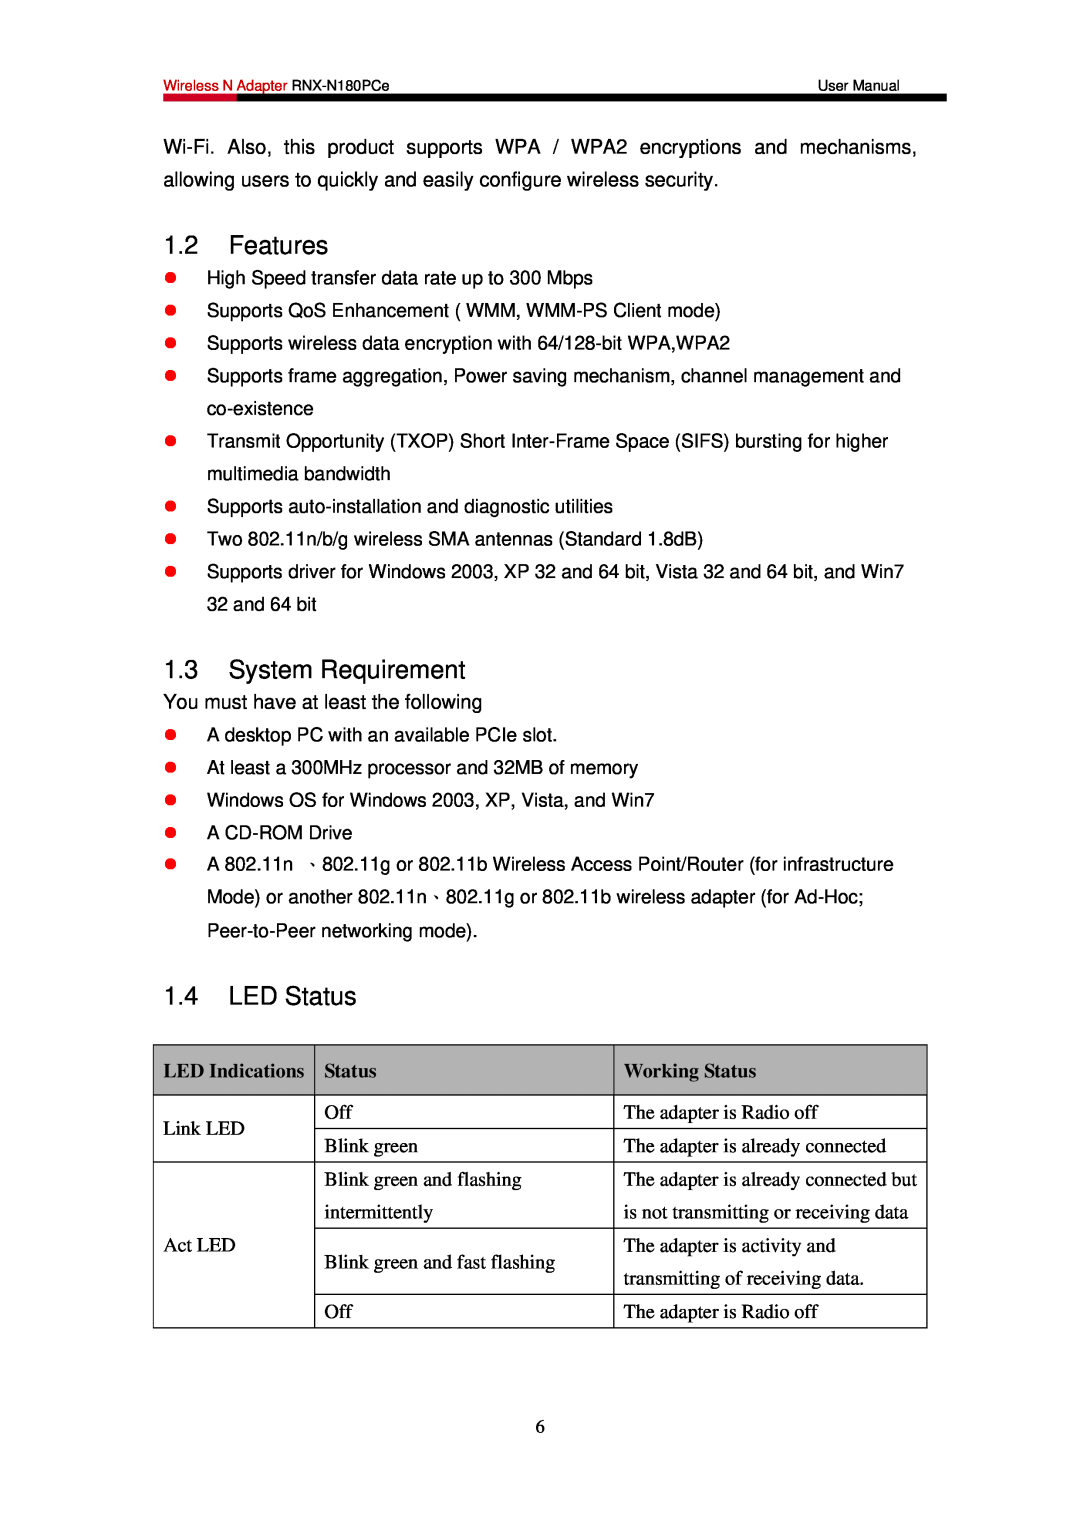 Rosewill RNX-N180PCE user manual Features, System Requirement, LED Status, LED Indications, Working Status 